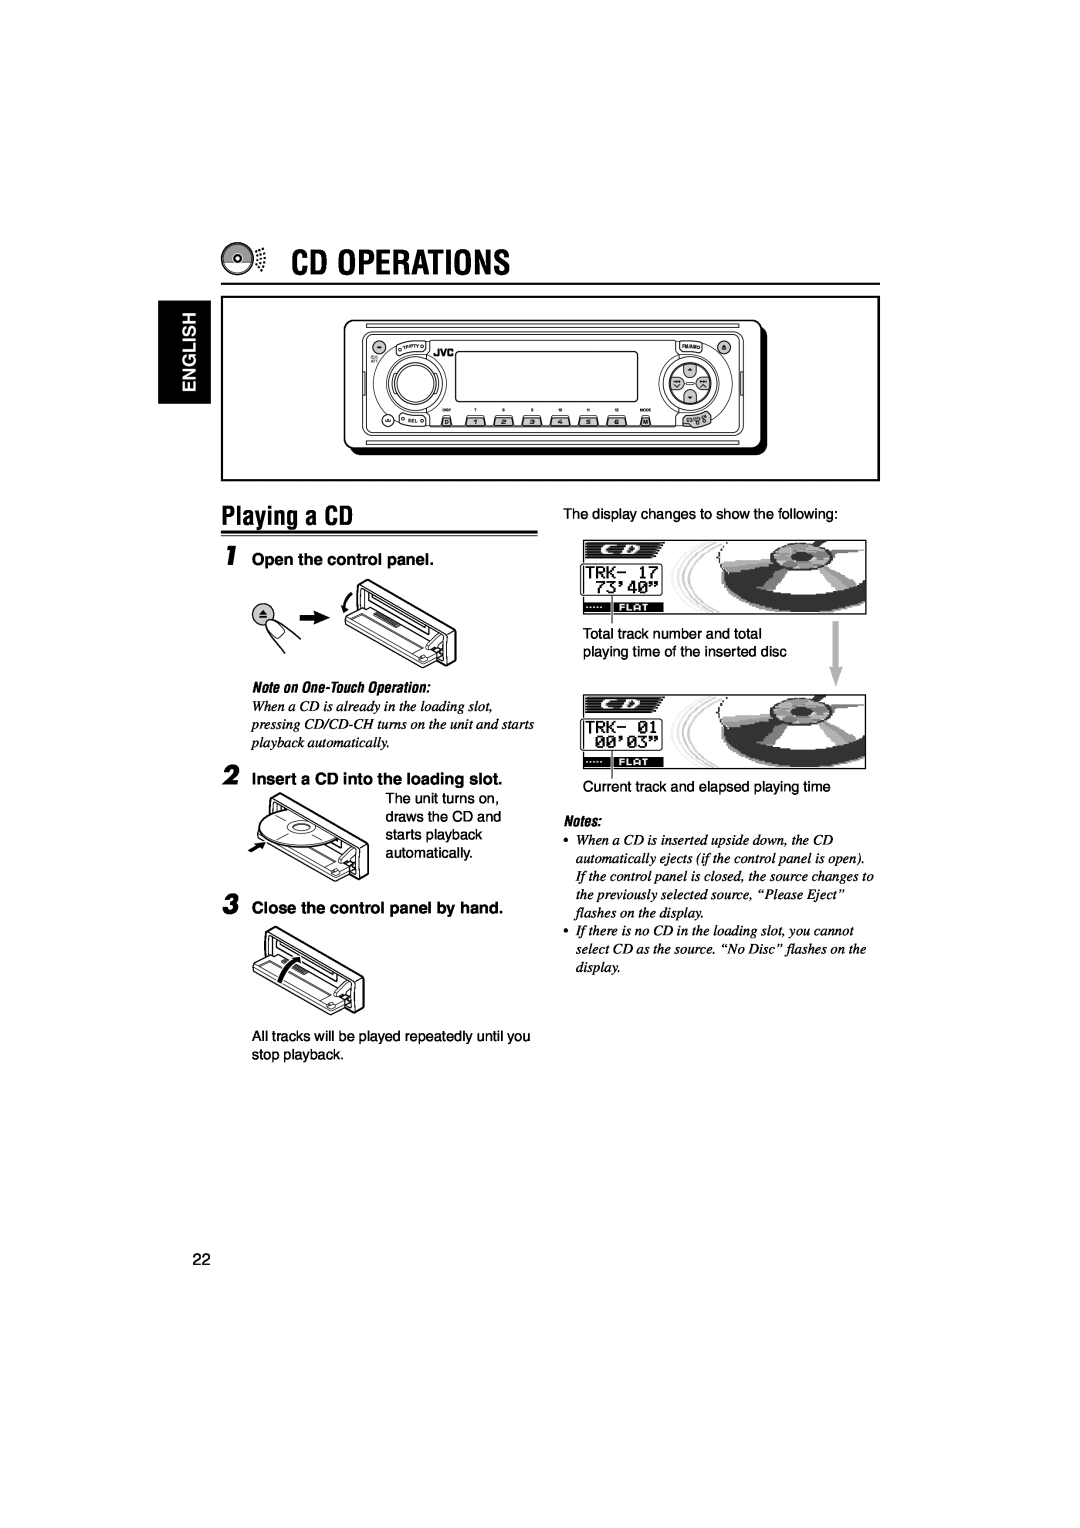 JVC KD-LH1101 manual Cd Operations, Playing a CD, English, Open the control panel, Insert a CD into the loading slot, Notes 